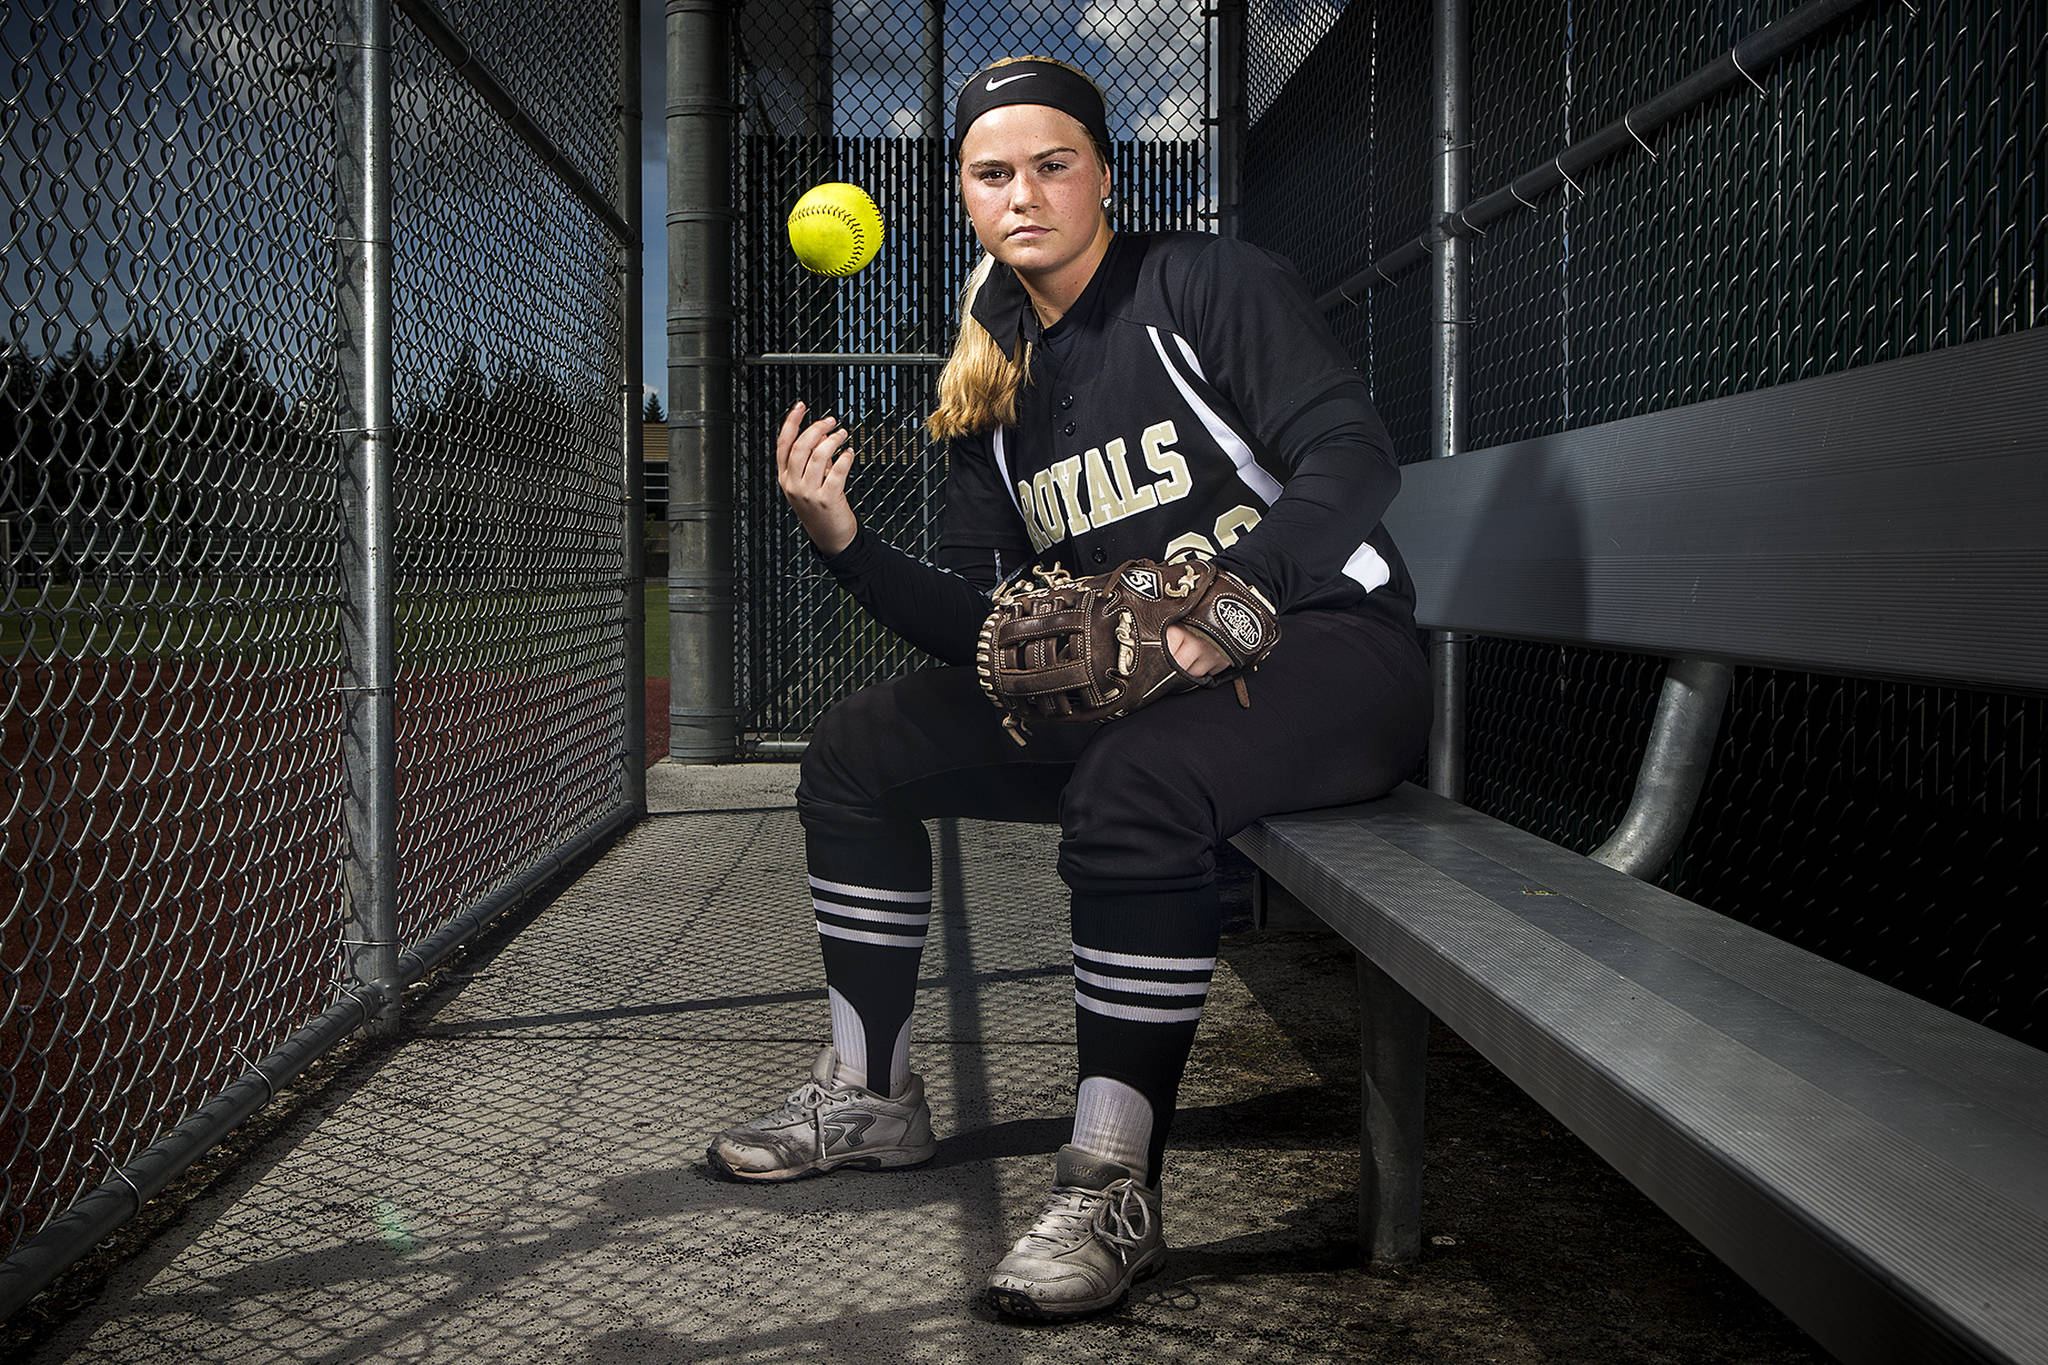 Lynnwood senior Maddie Morgan is The Herald’s 2017 Softball Player of the Year. (Ian Terry / The Herald)